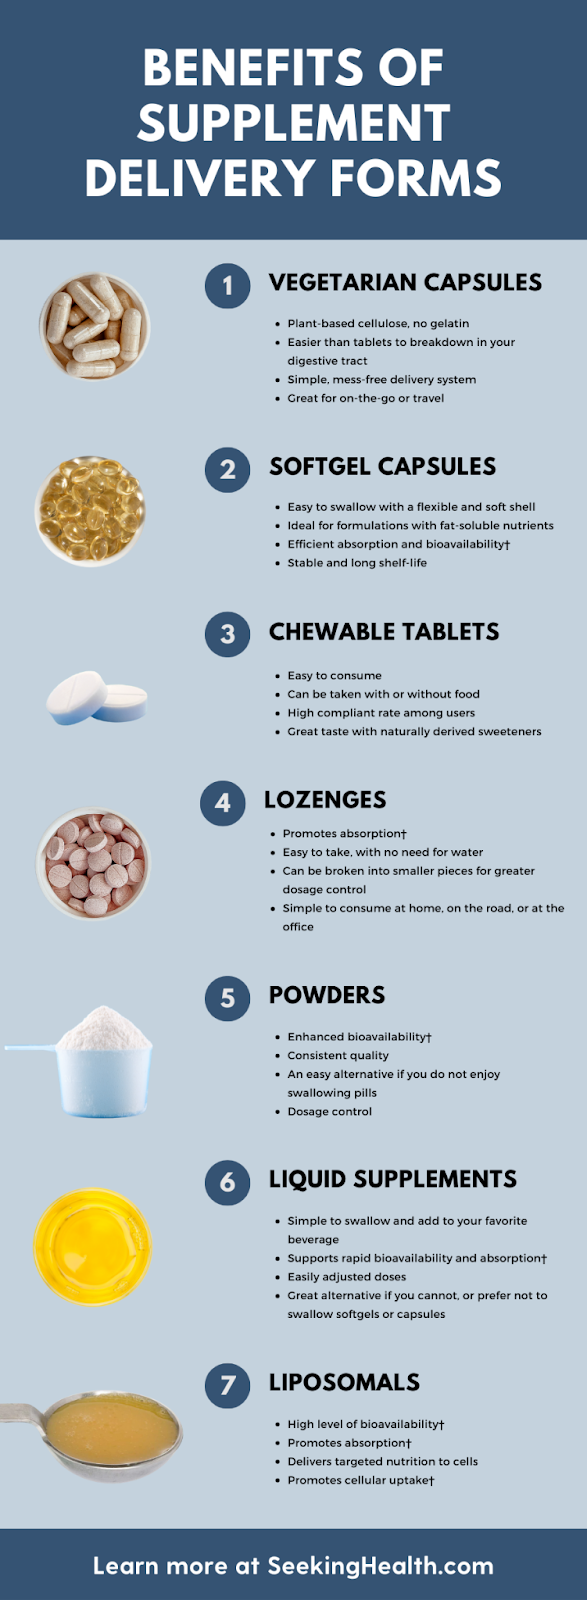 Supplement Delivery Forms_Infographic